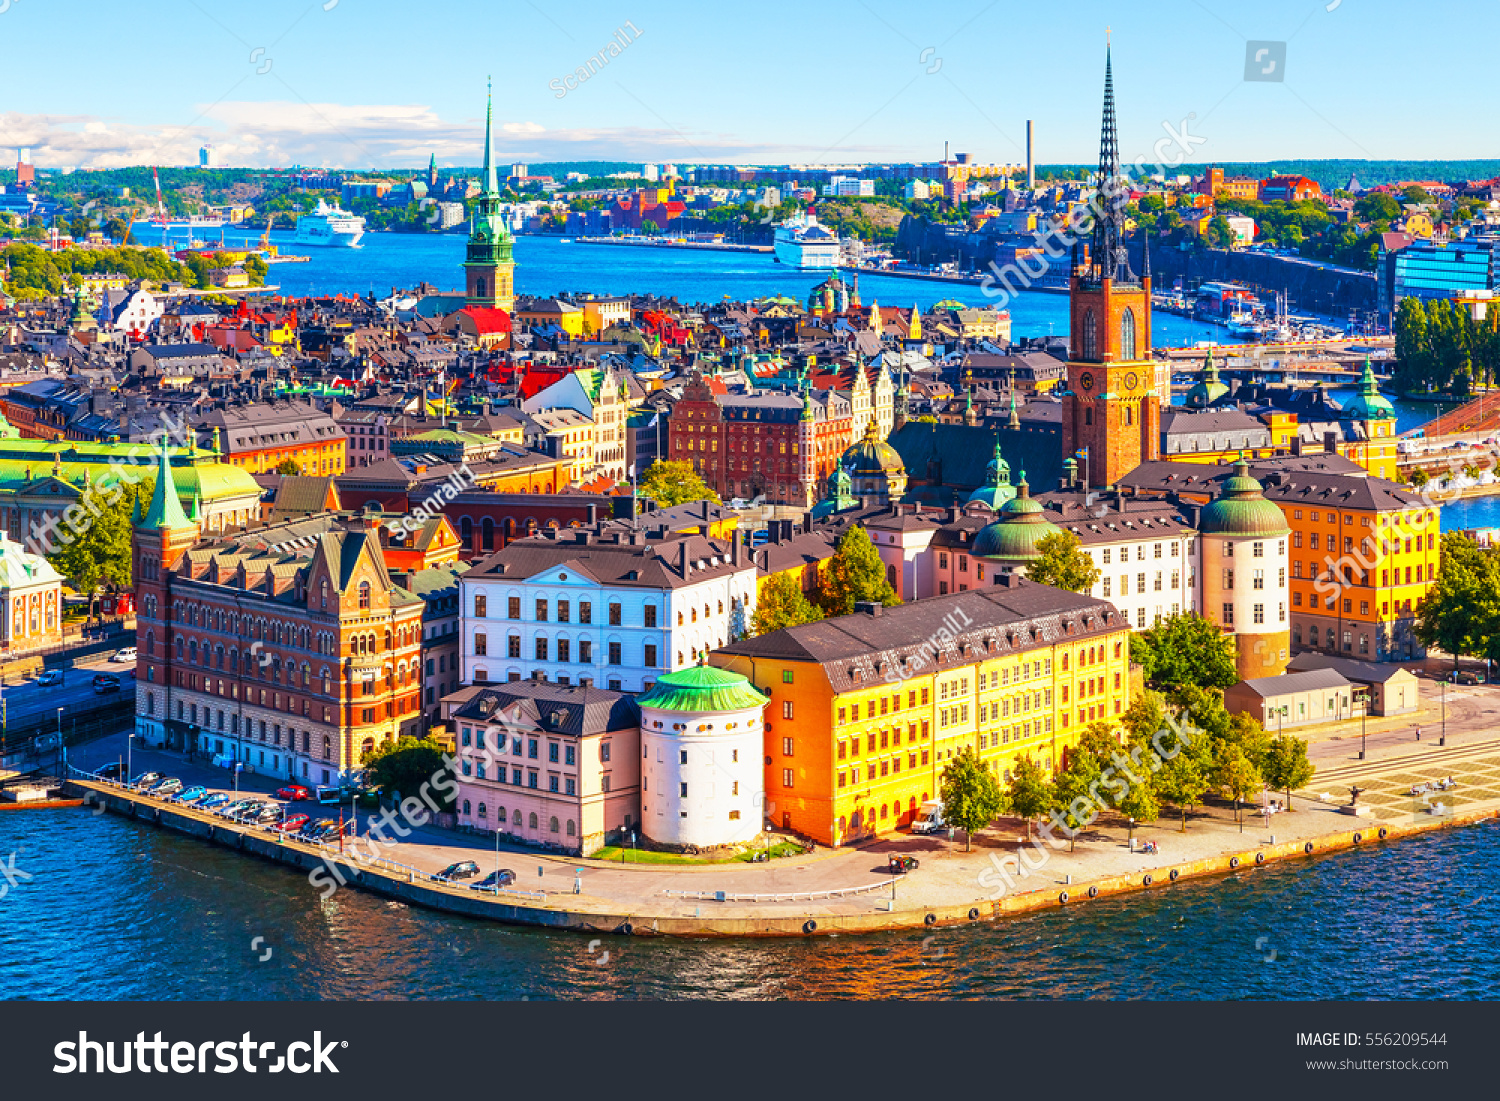 Scenic summer aerial panorama of the Old Town (Gamla Stan) pier architecture in Stockholm, Sweden #556209544